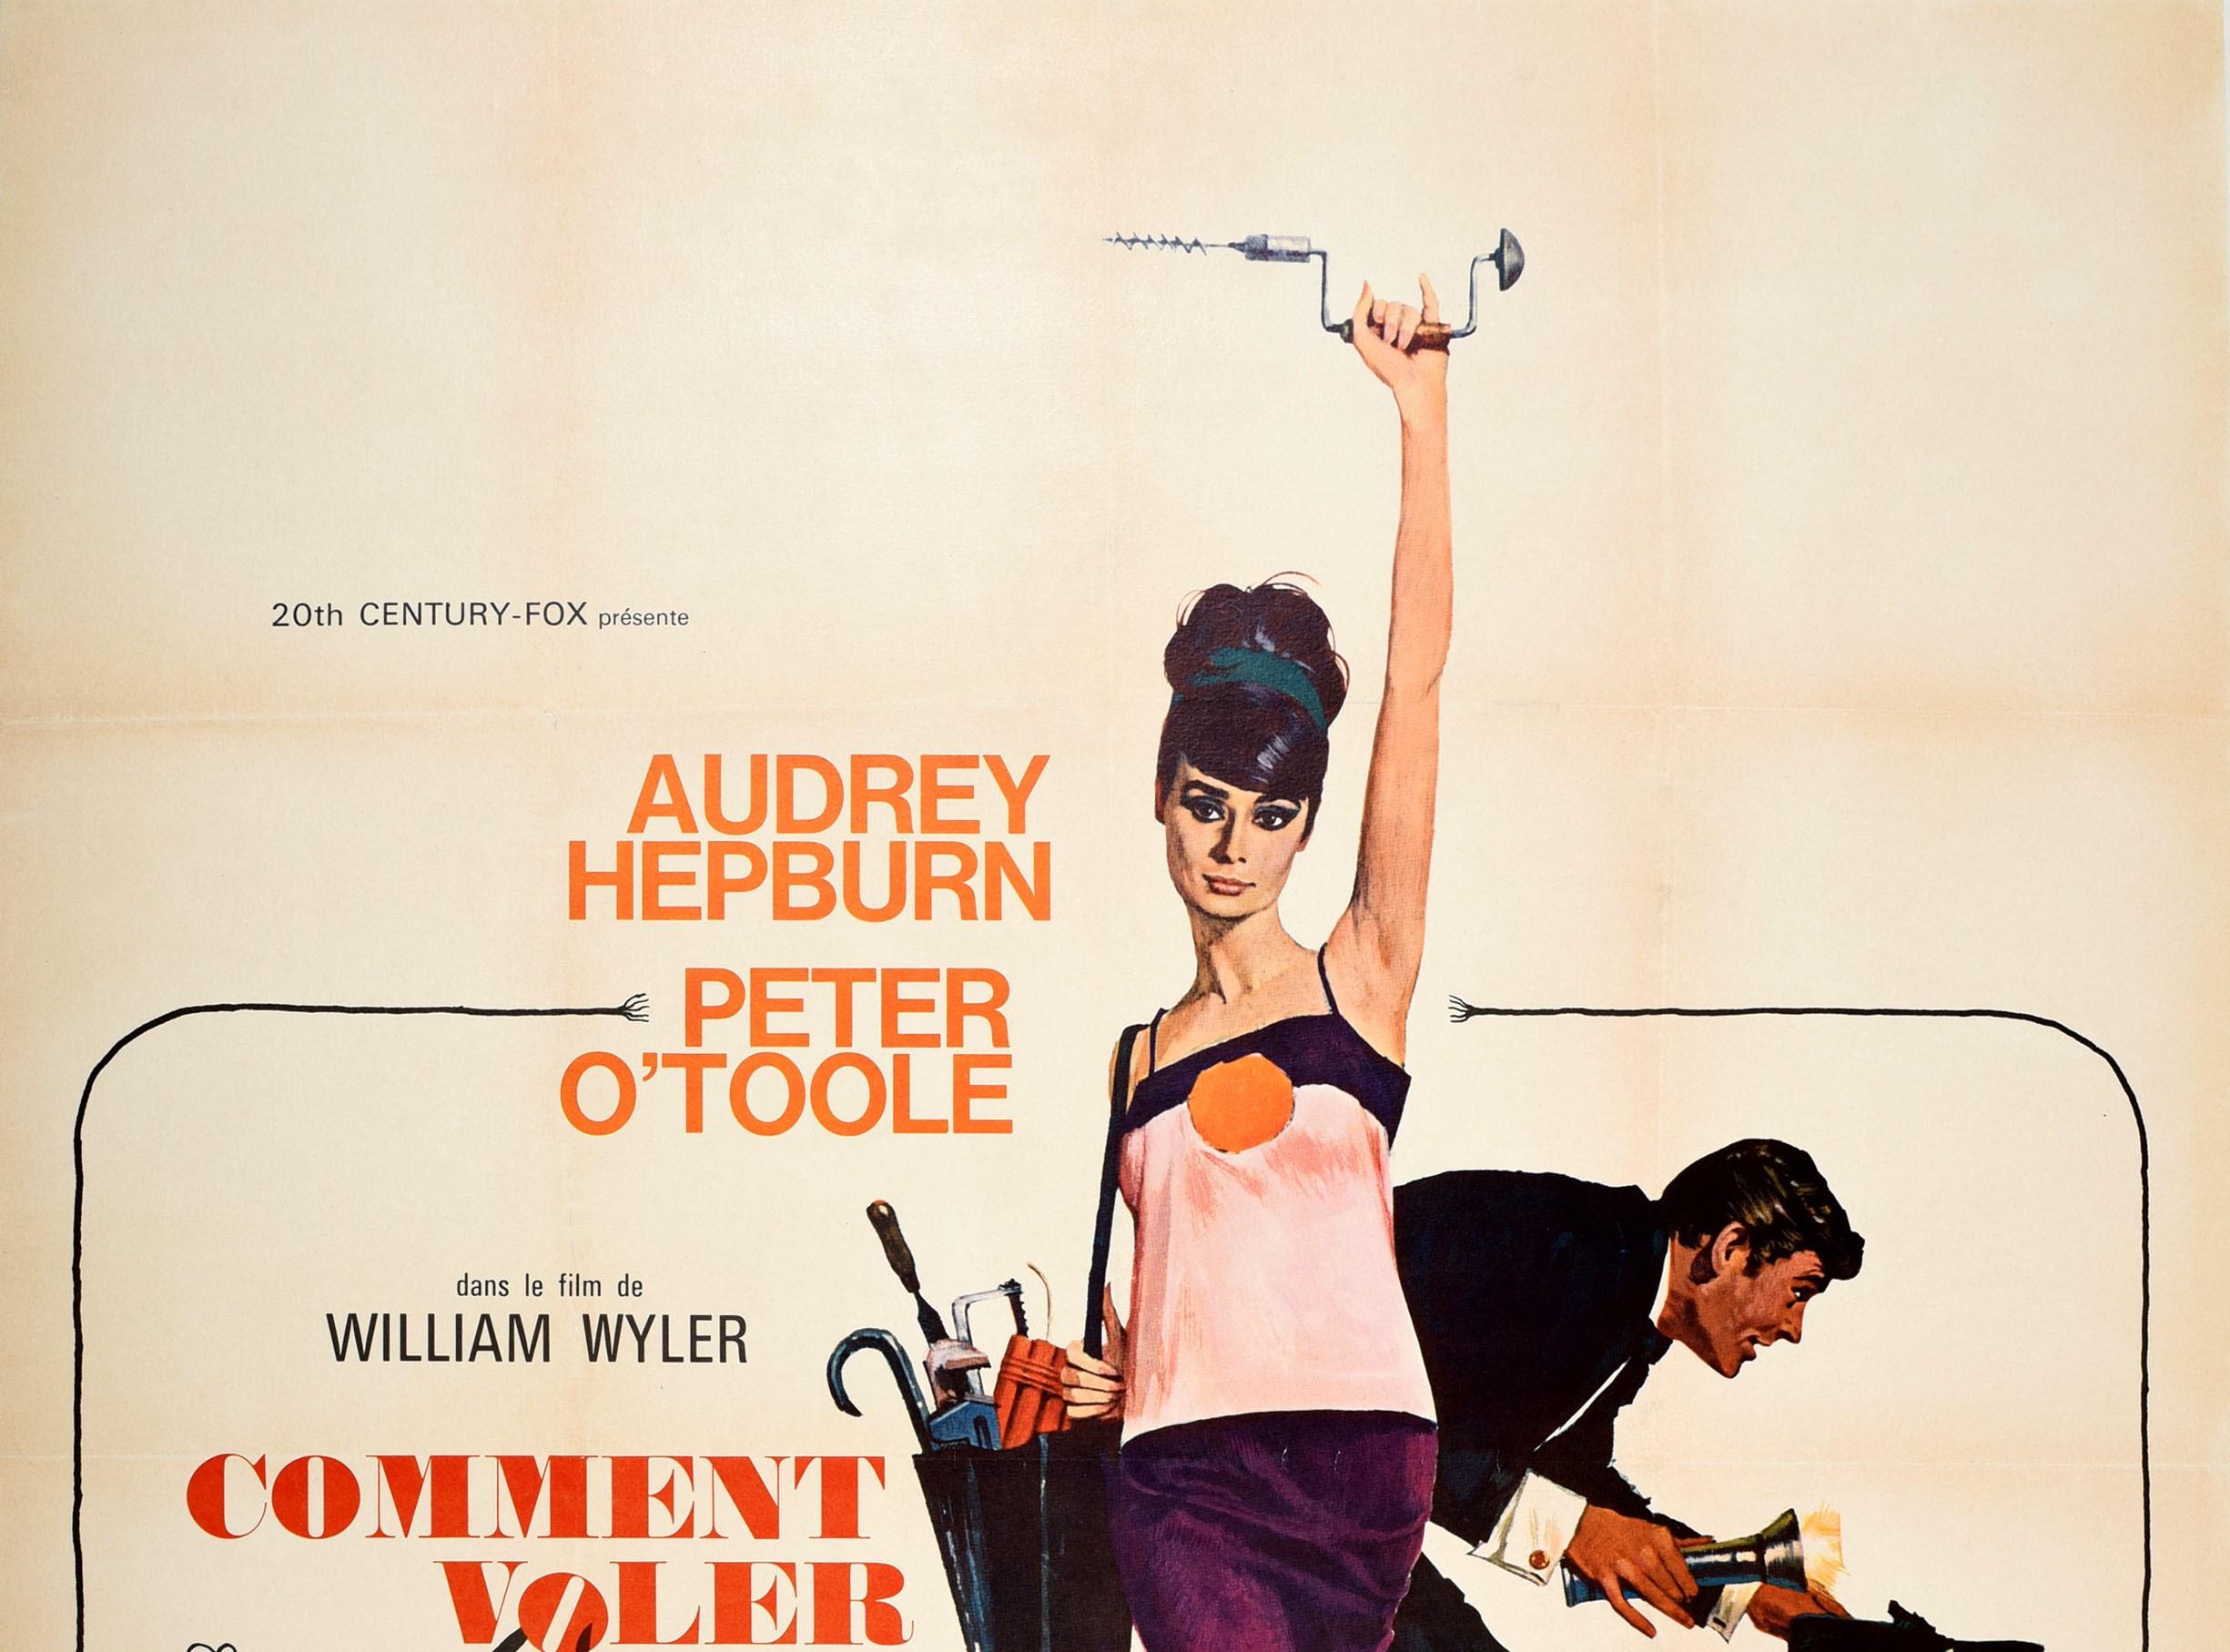 Original vintage movie poster for the French release of the romantic crime comedy - How To Steal a Million / Comment Voler Un Million De Dollars - directed by William Wyler and starring Audrey Hepburn and Peter O'Toole with Eli Wallach, Hugh